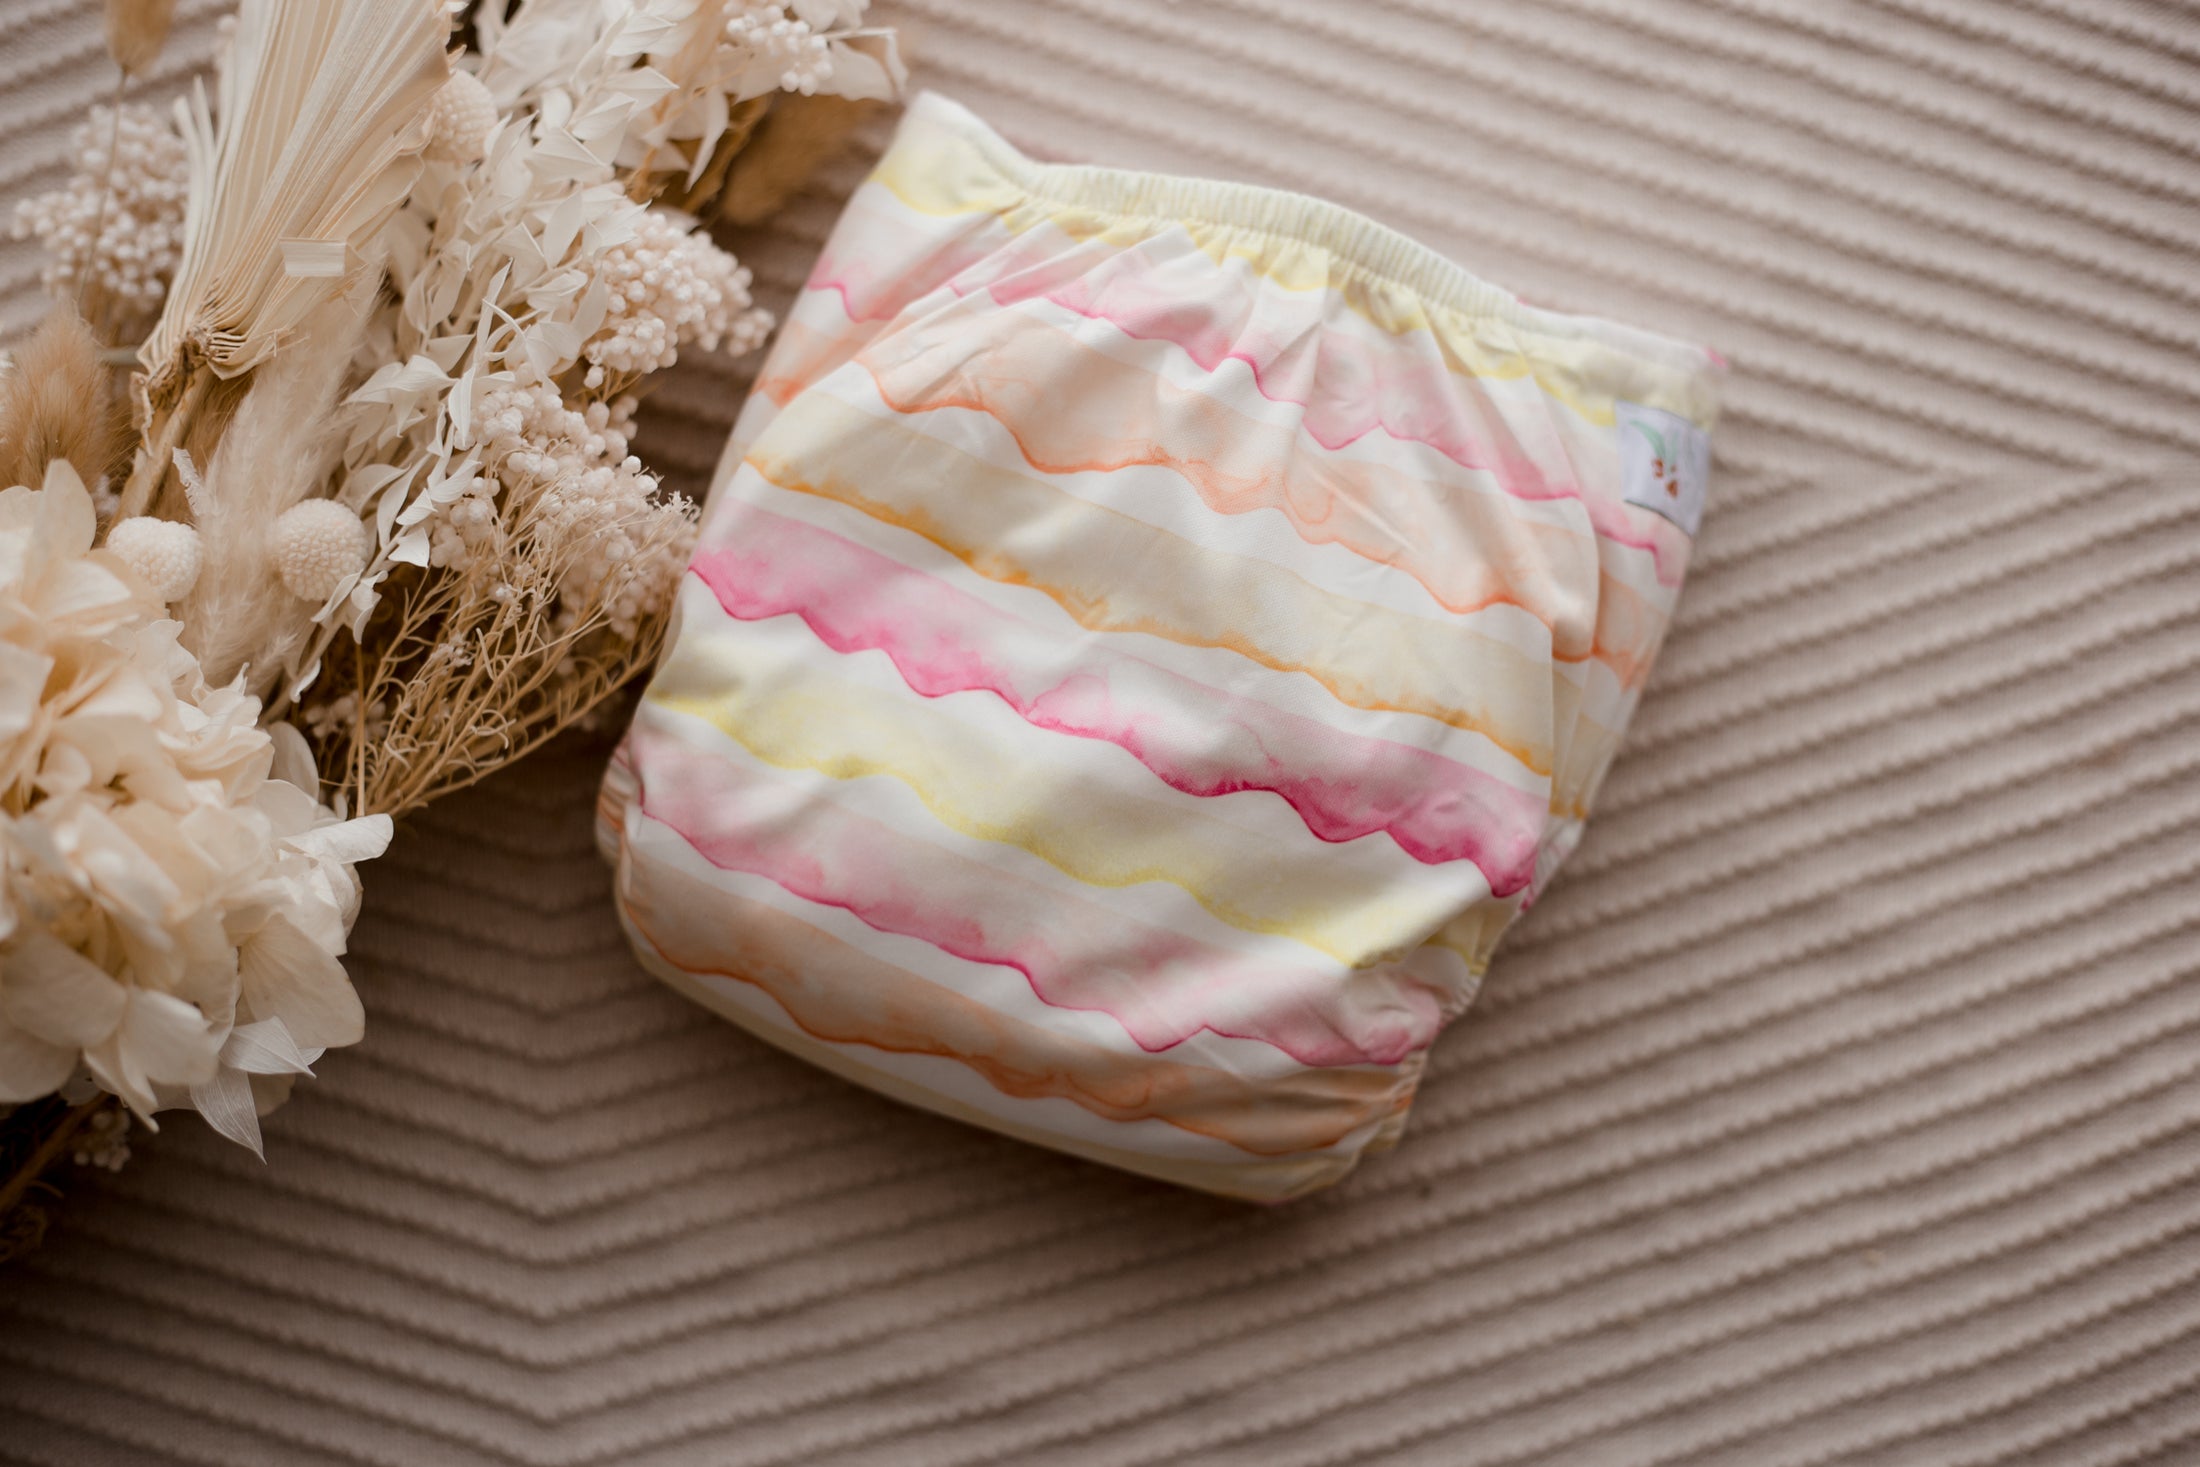 Australian cloth nappies. Reusable diapers. water colour cloth nappy. My little gumnut. reusable nappies australia.